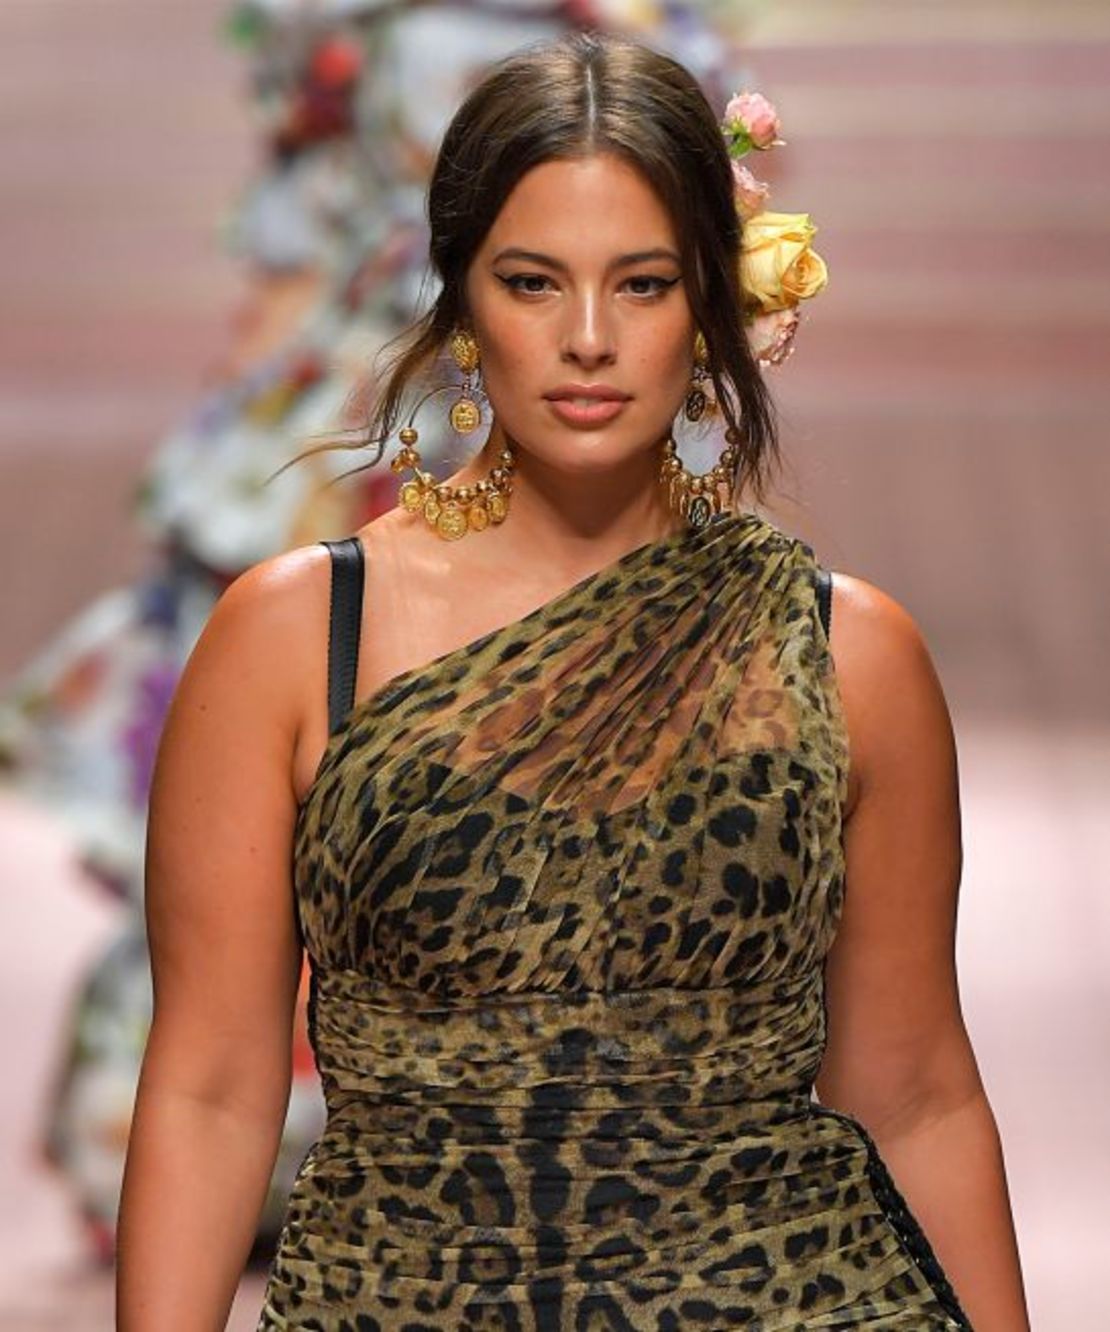 Plus size fashion trends for fall 2013 - National